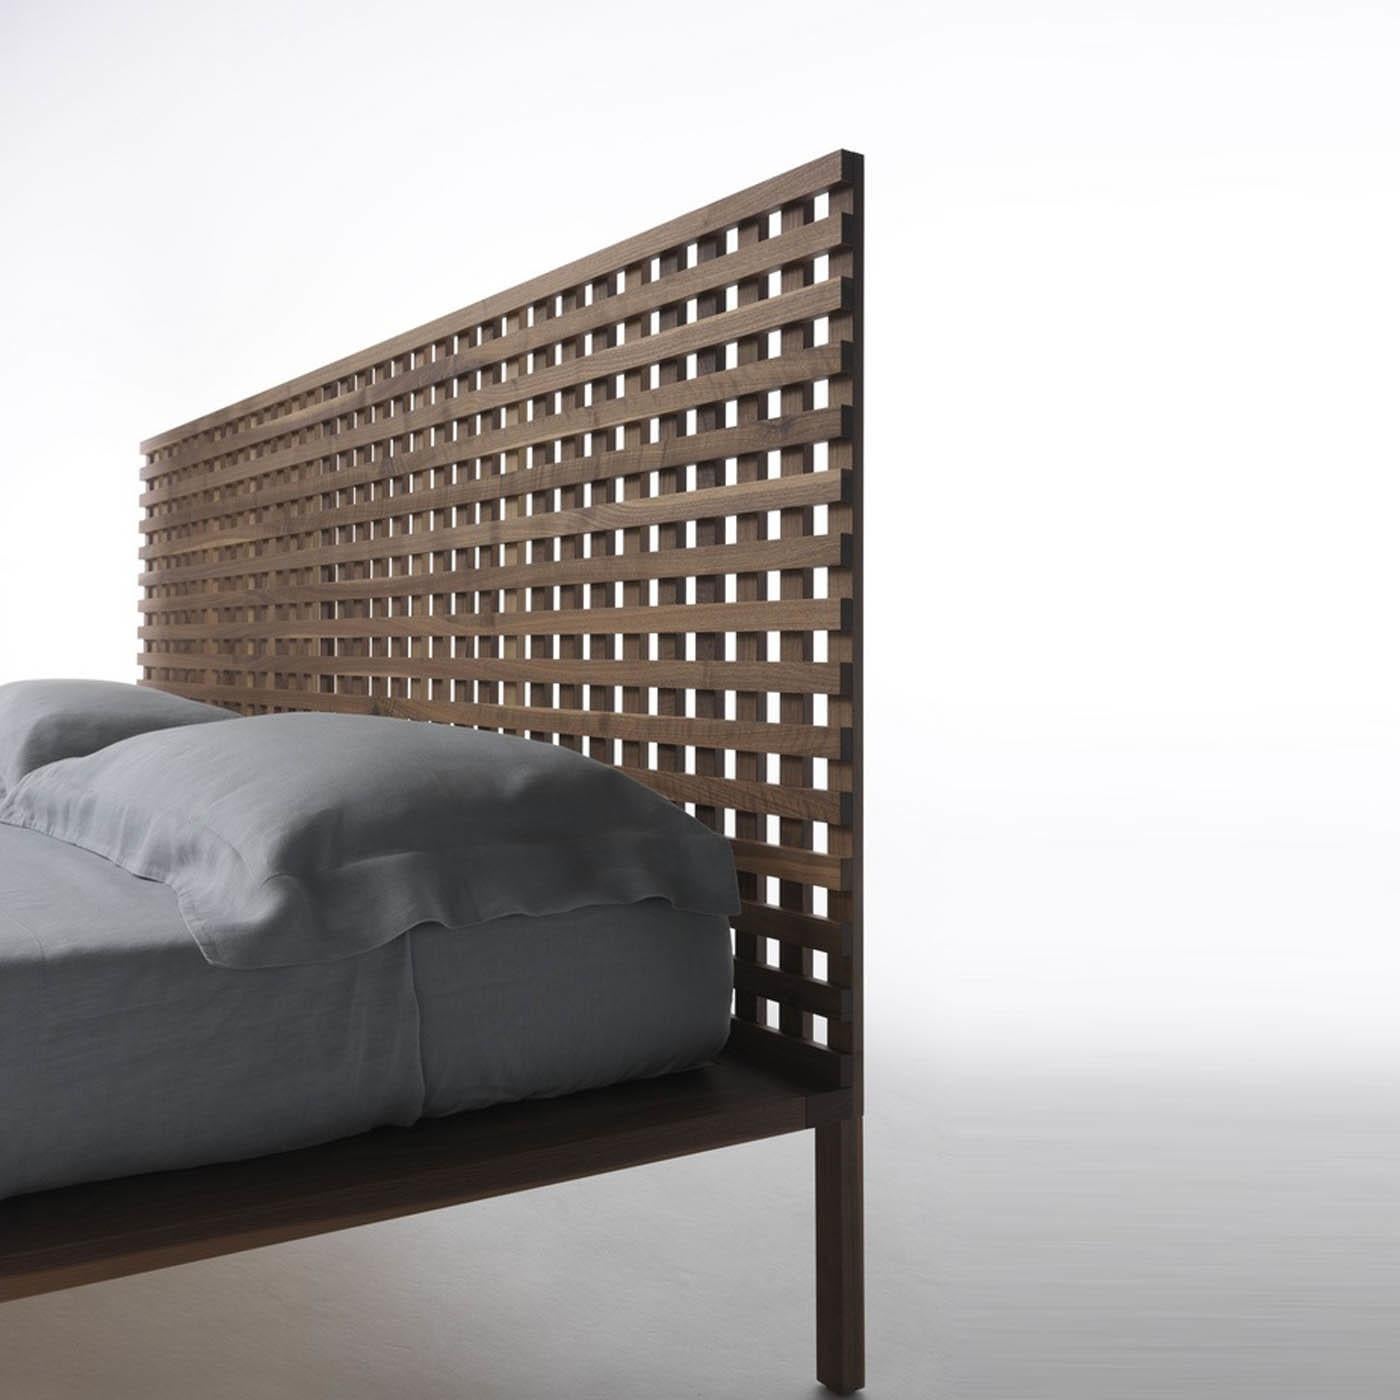 Completely made of solid Canaletto walnut, this striking bed by Matteo Thun and Antonio Rodriguez boasts a unique and captivating design. It features a headboard made of orthogonal slats giving shape to a fine and distinctive fretwork. An example of